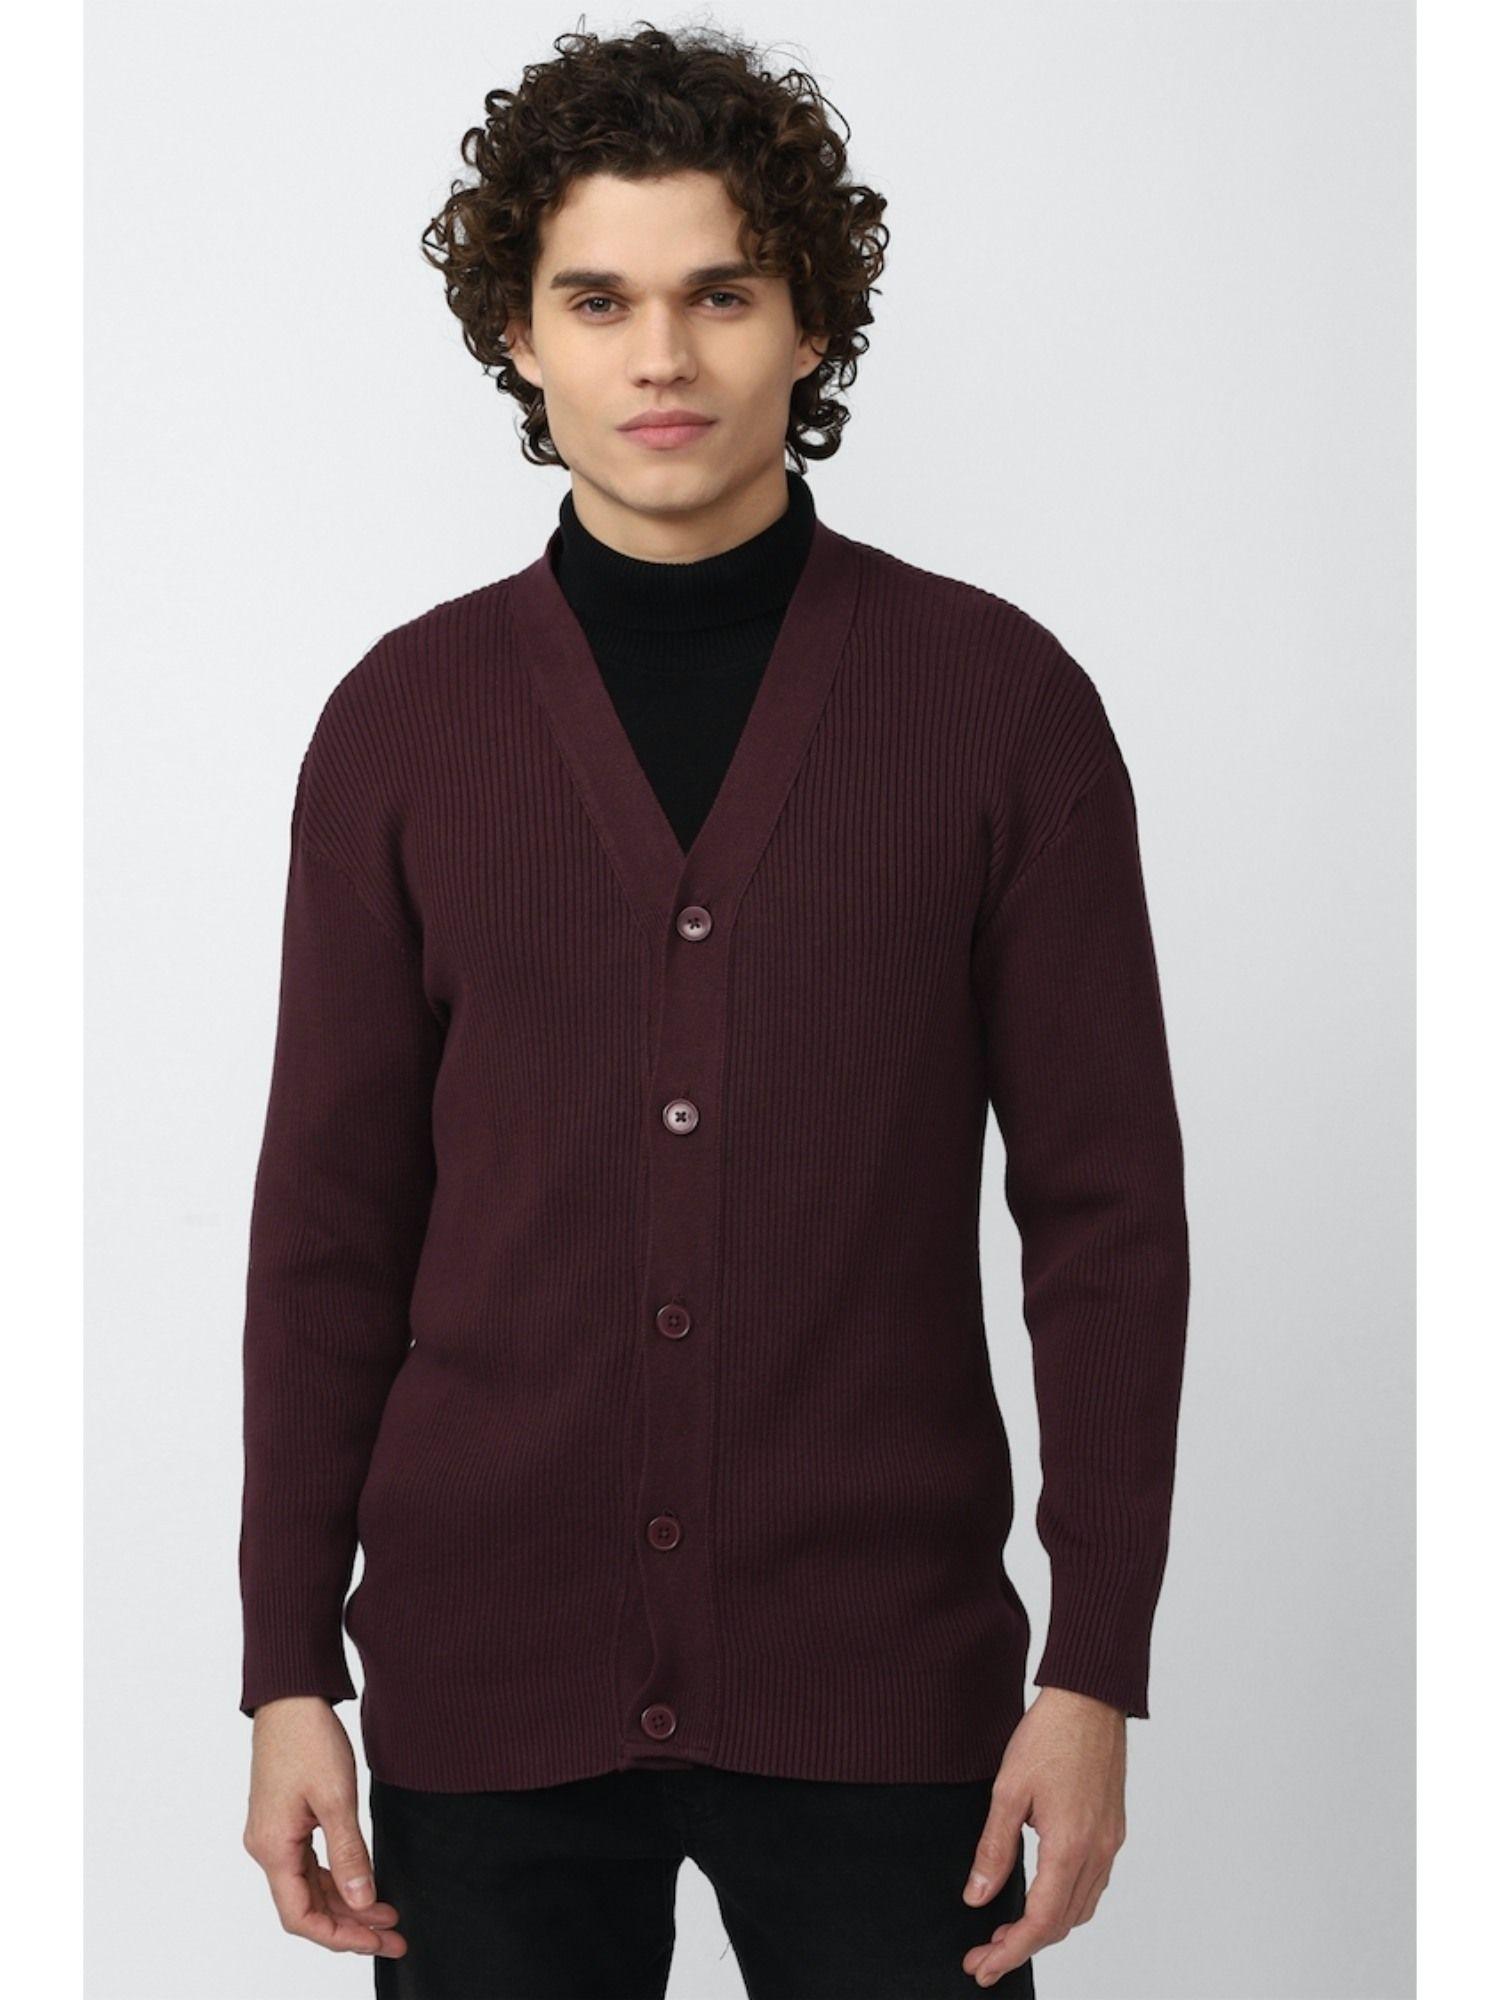 solid maroon solid sweater tops